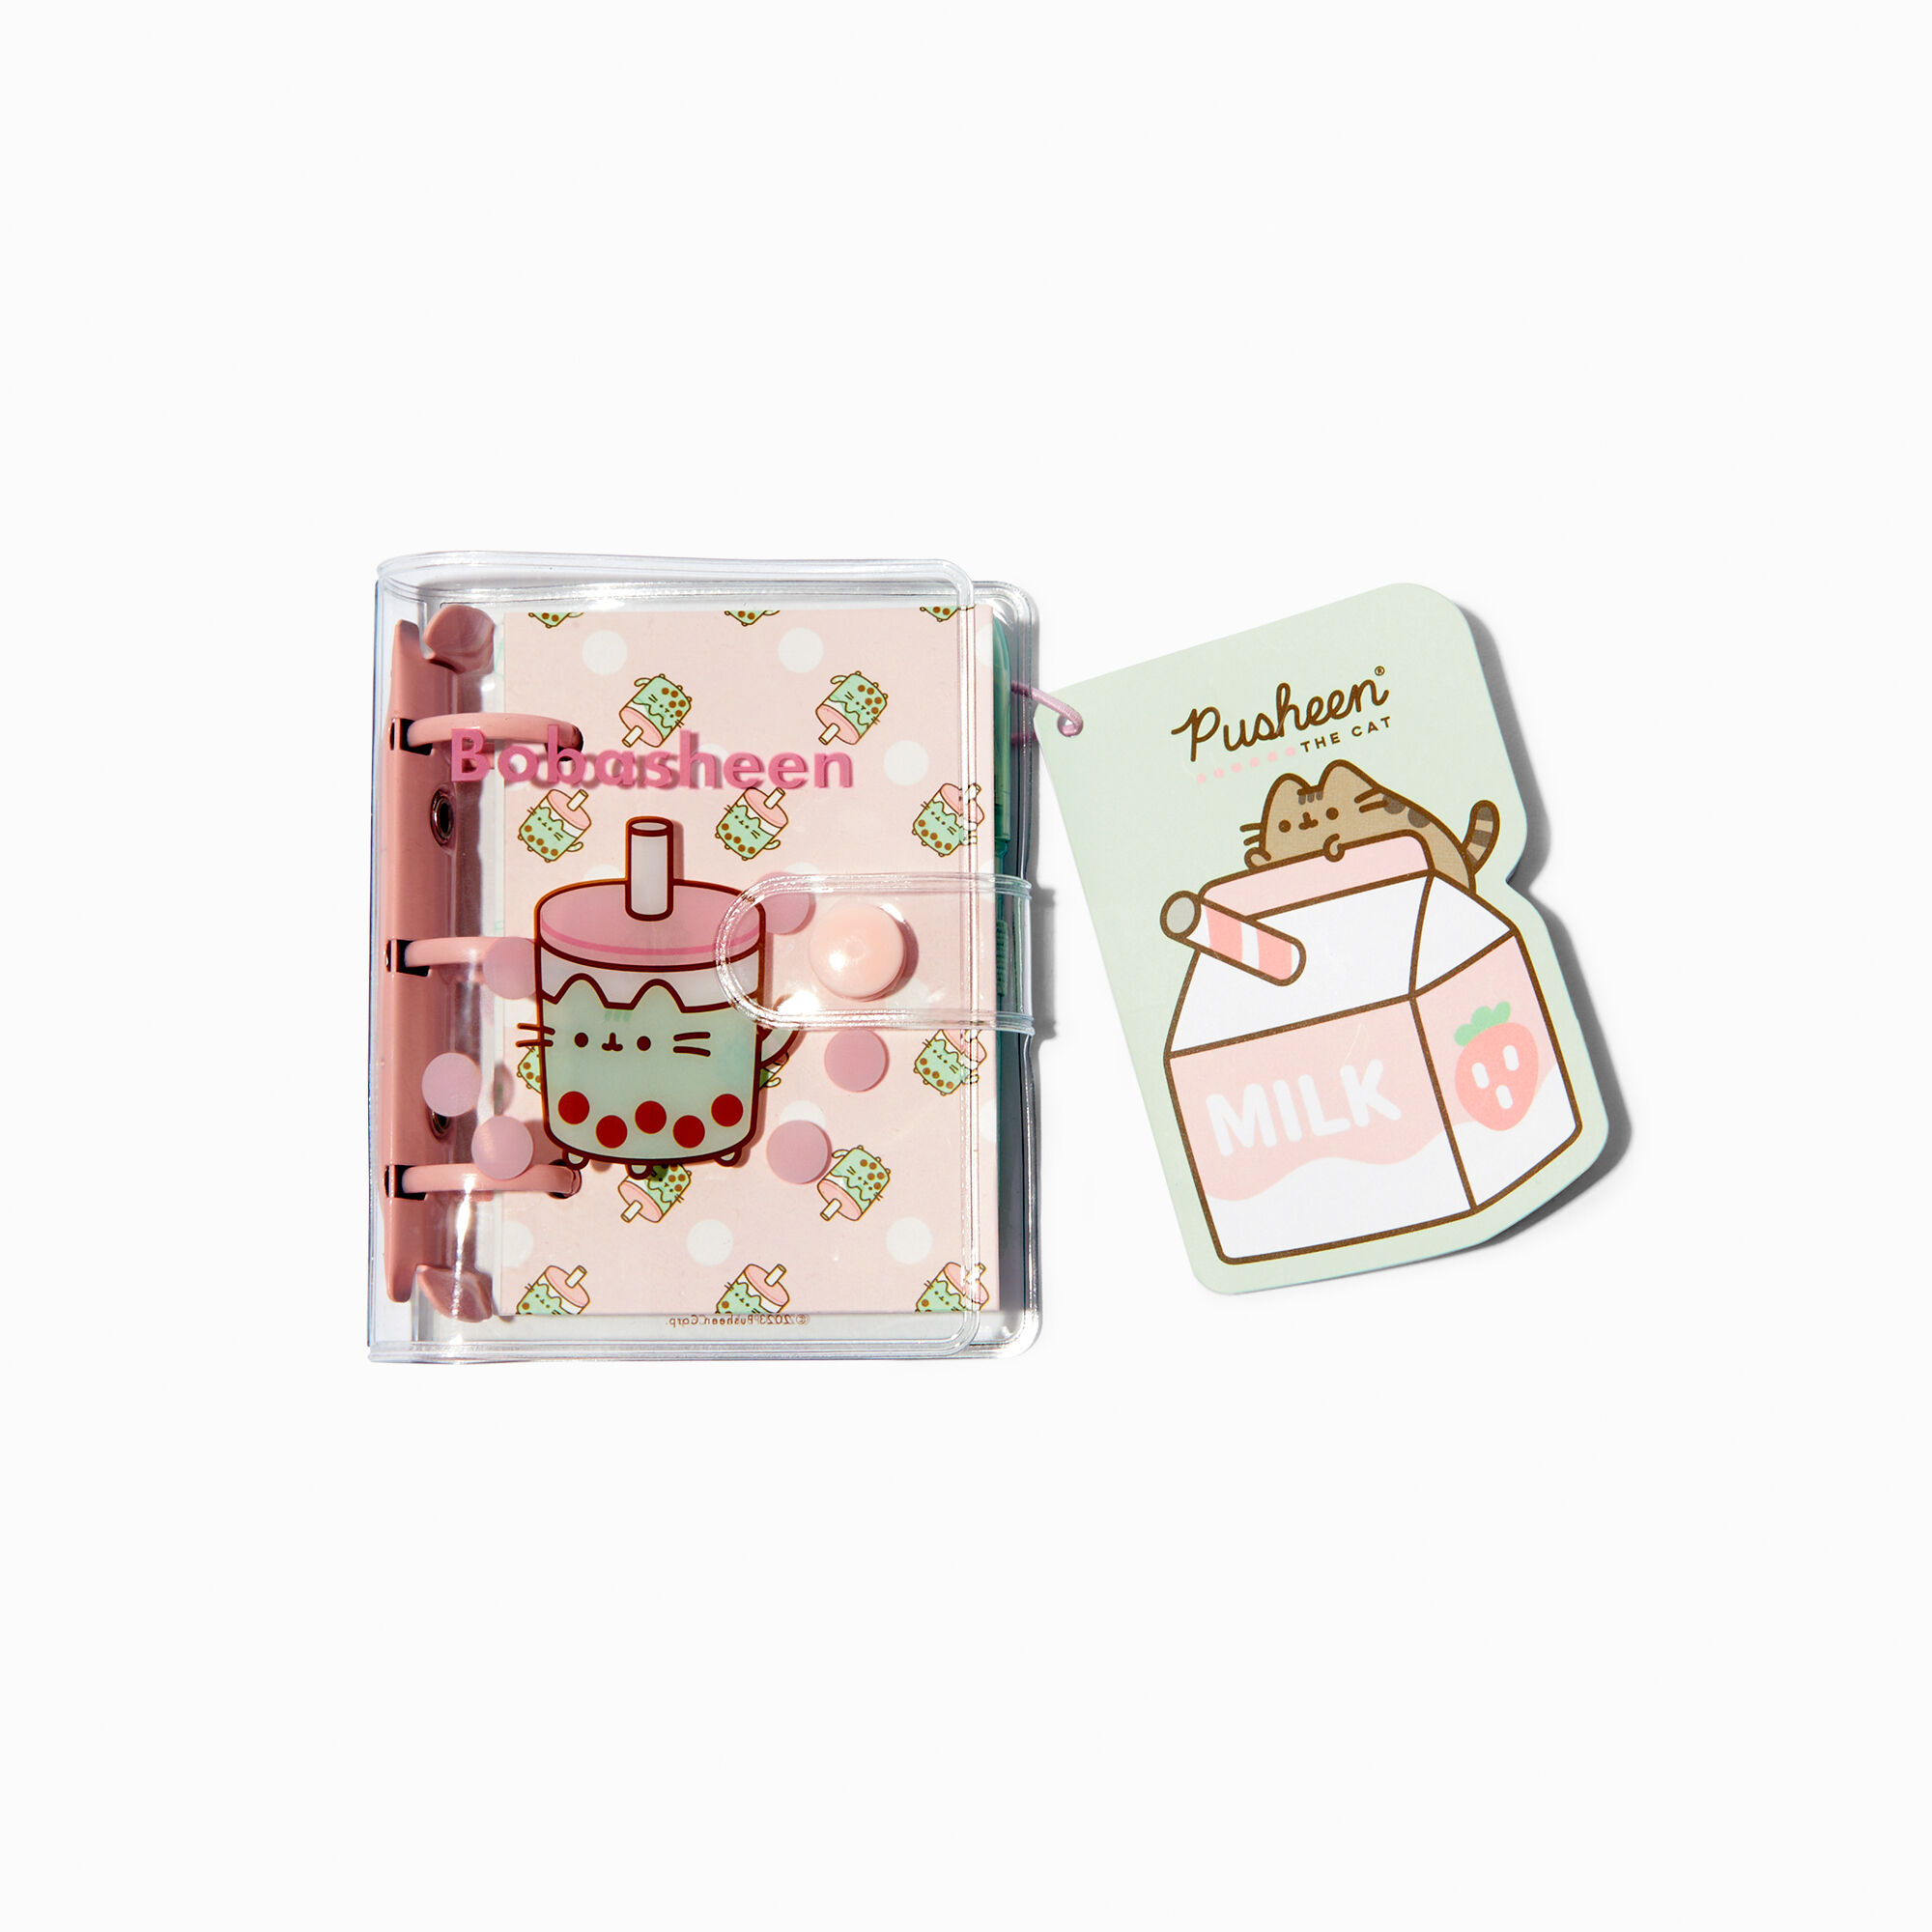 View Claires Pusheen Mini Pocket Notebook information